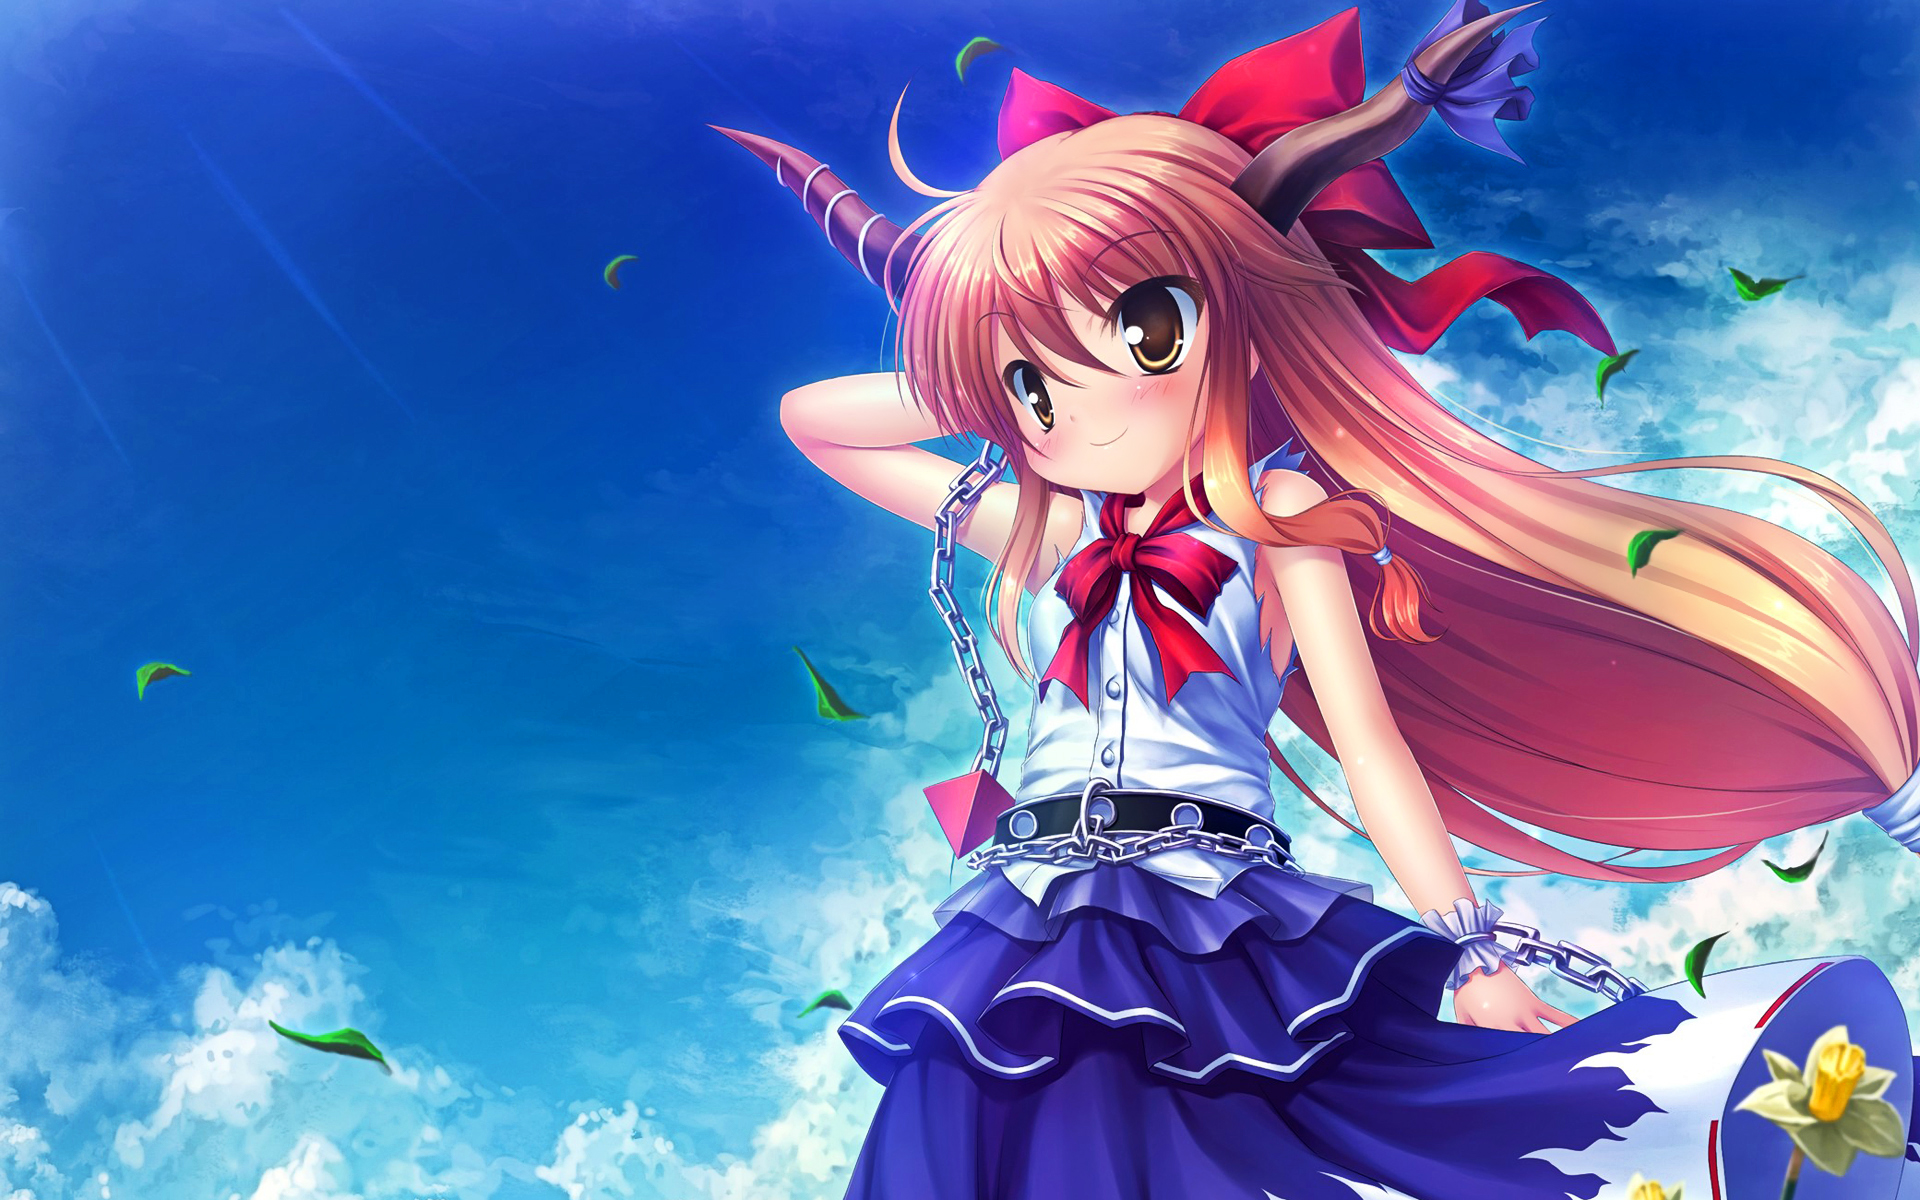 26,983 Anime Wallpaper Images, Stock Photos, 3D objects, & Vectors |  Shutterstock